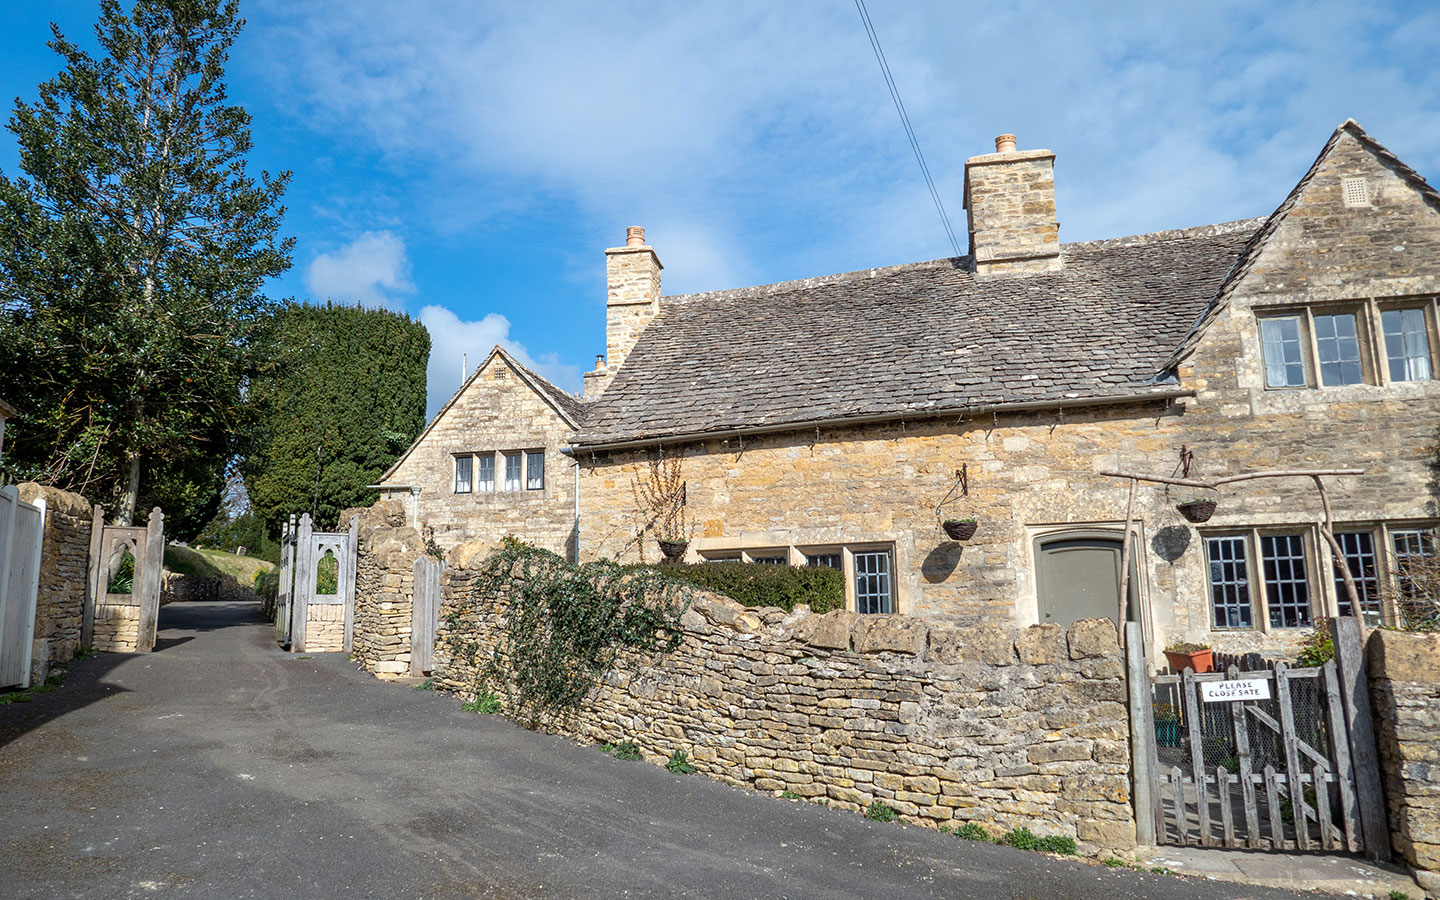 Historic buildings in the Square, Upper Slaughter